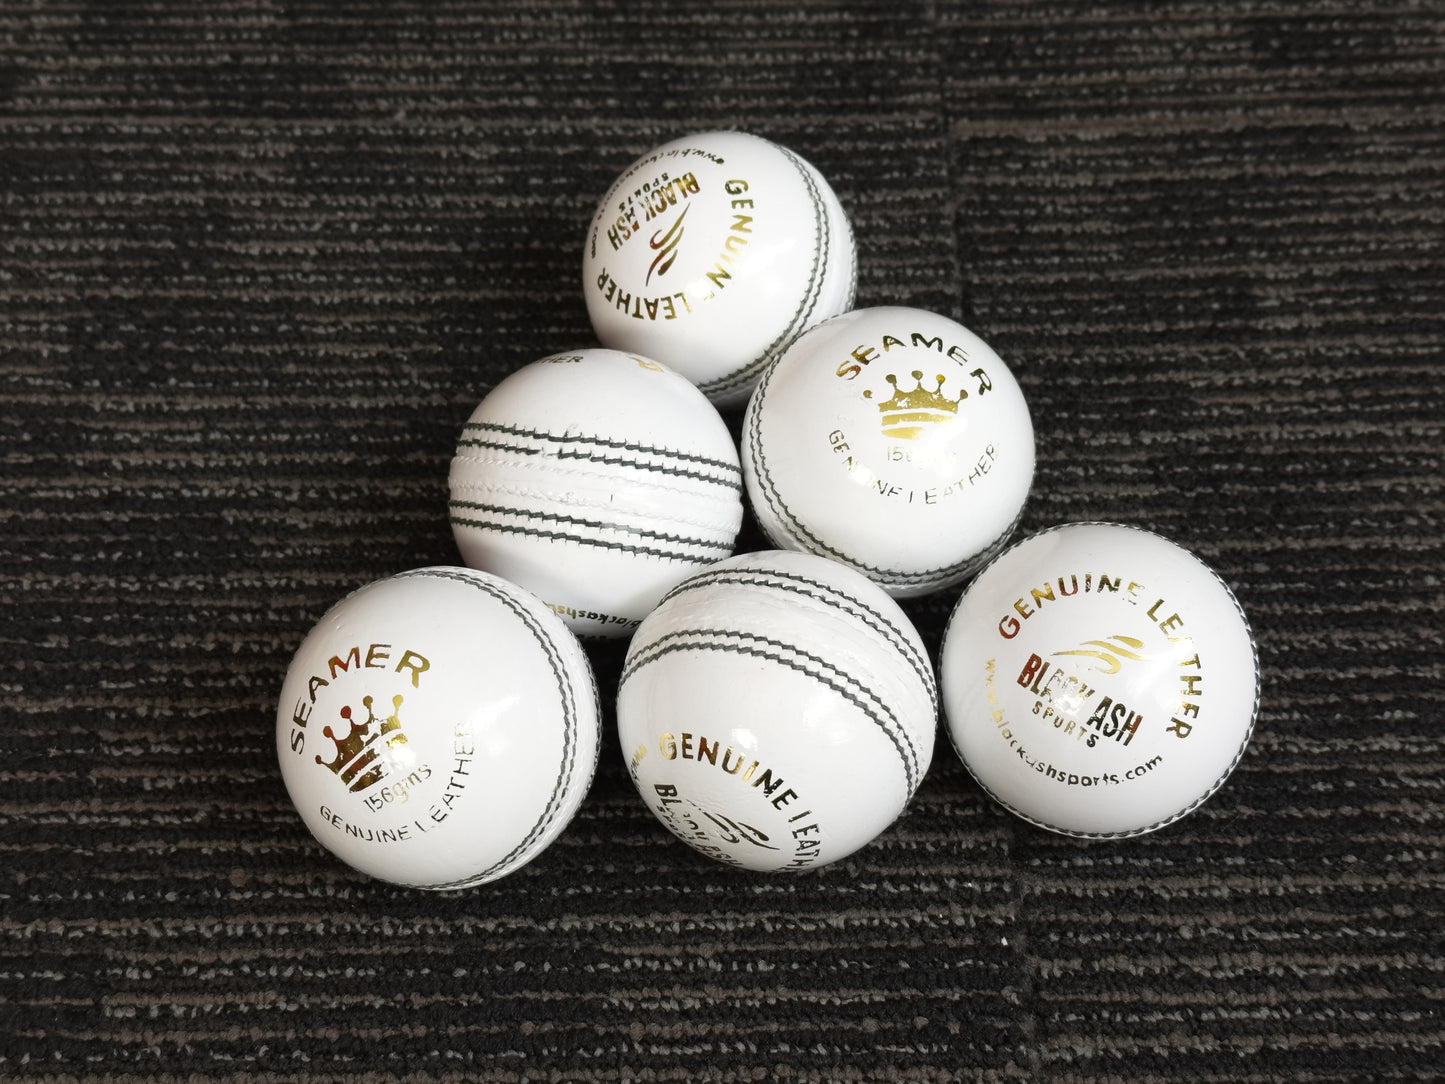 Pack of 6 white Black Ash Royal Crown cricket leather balls, 156 grams, designed for practice T20 cricket, with premium quality genuine leather, 4-piece construction, and meeting MCC standards